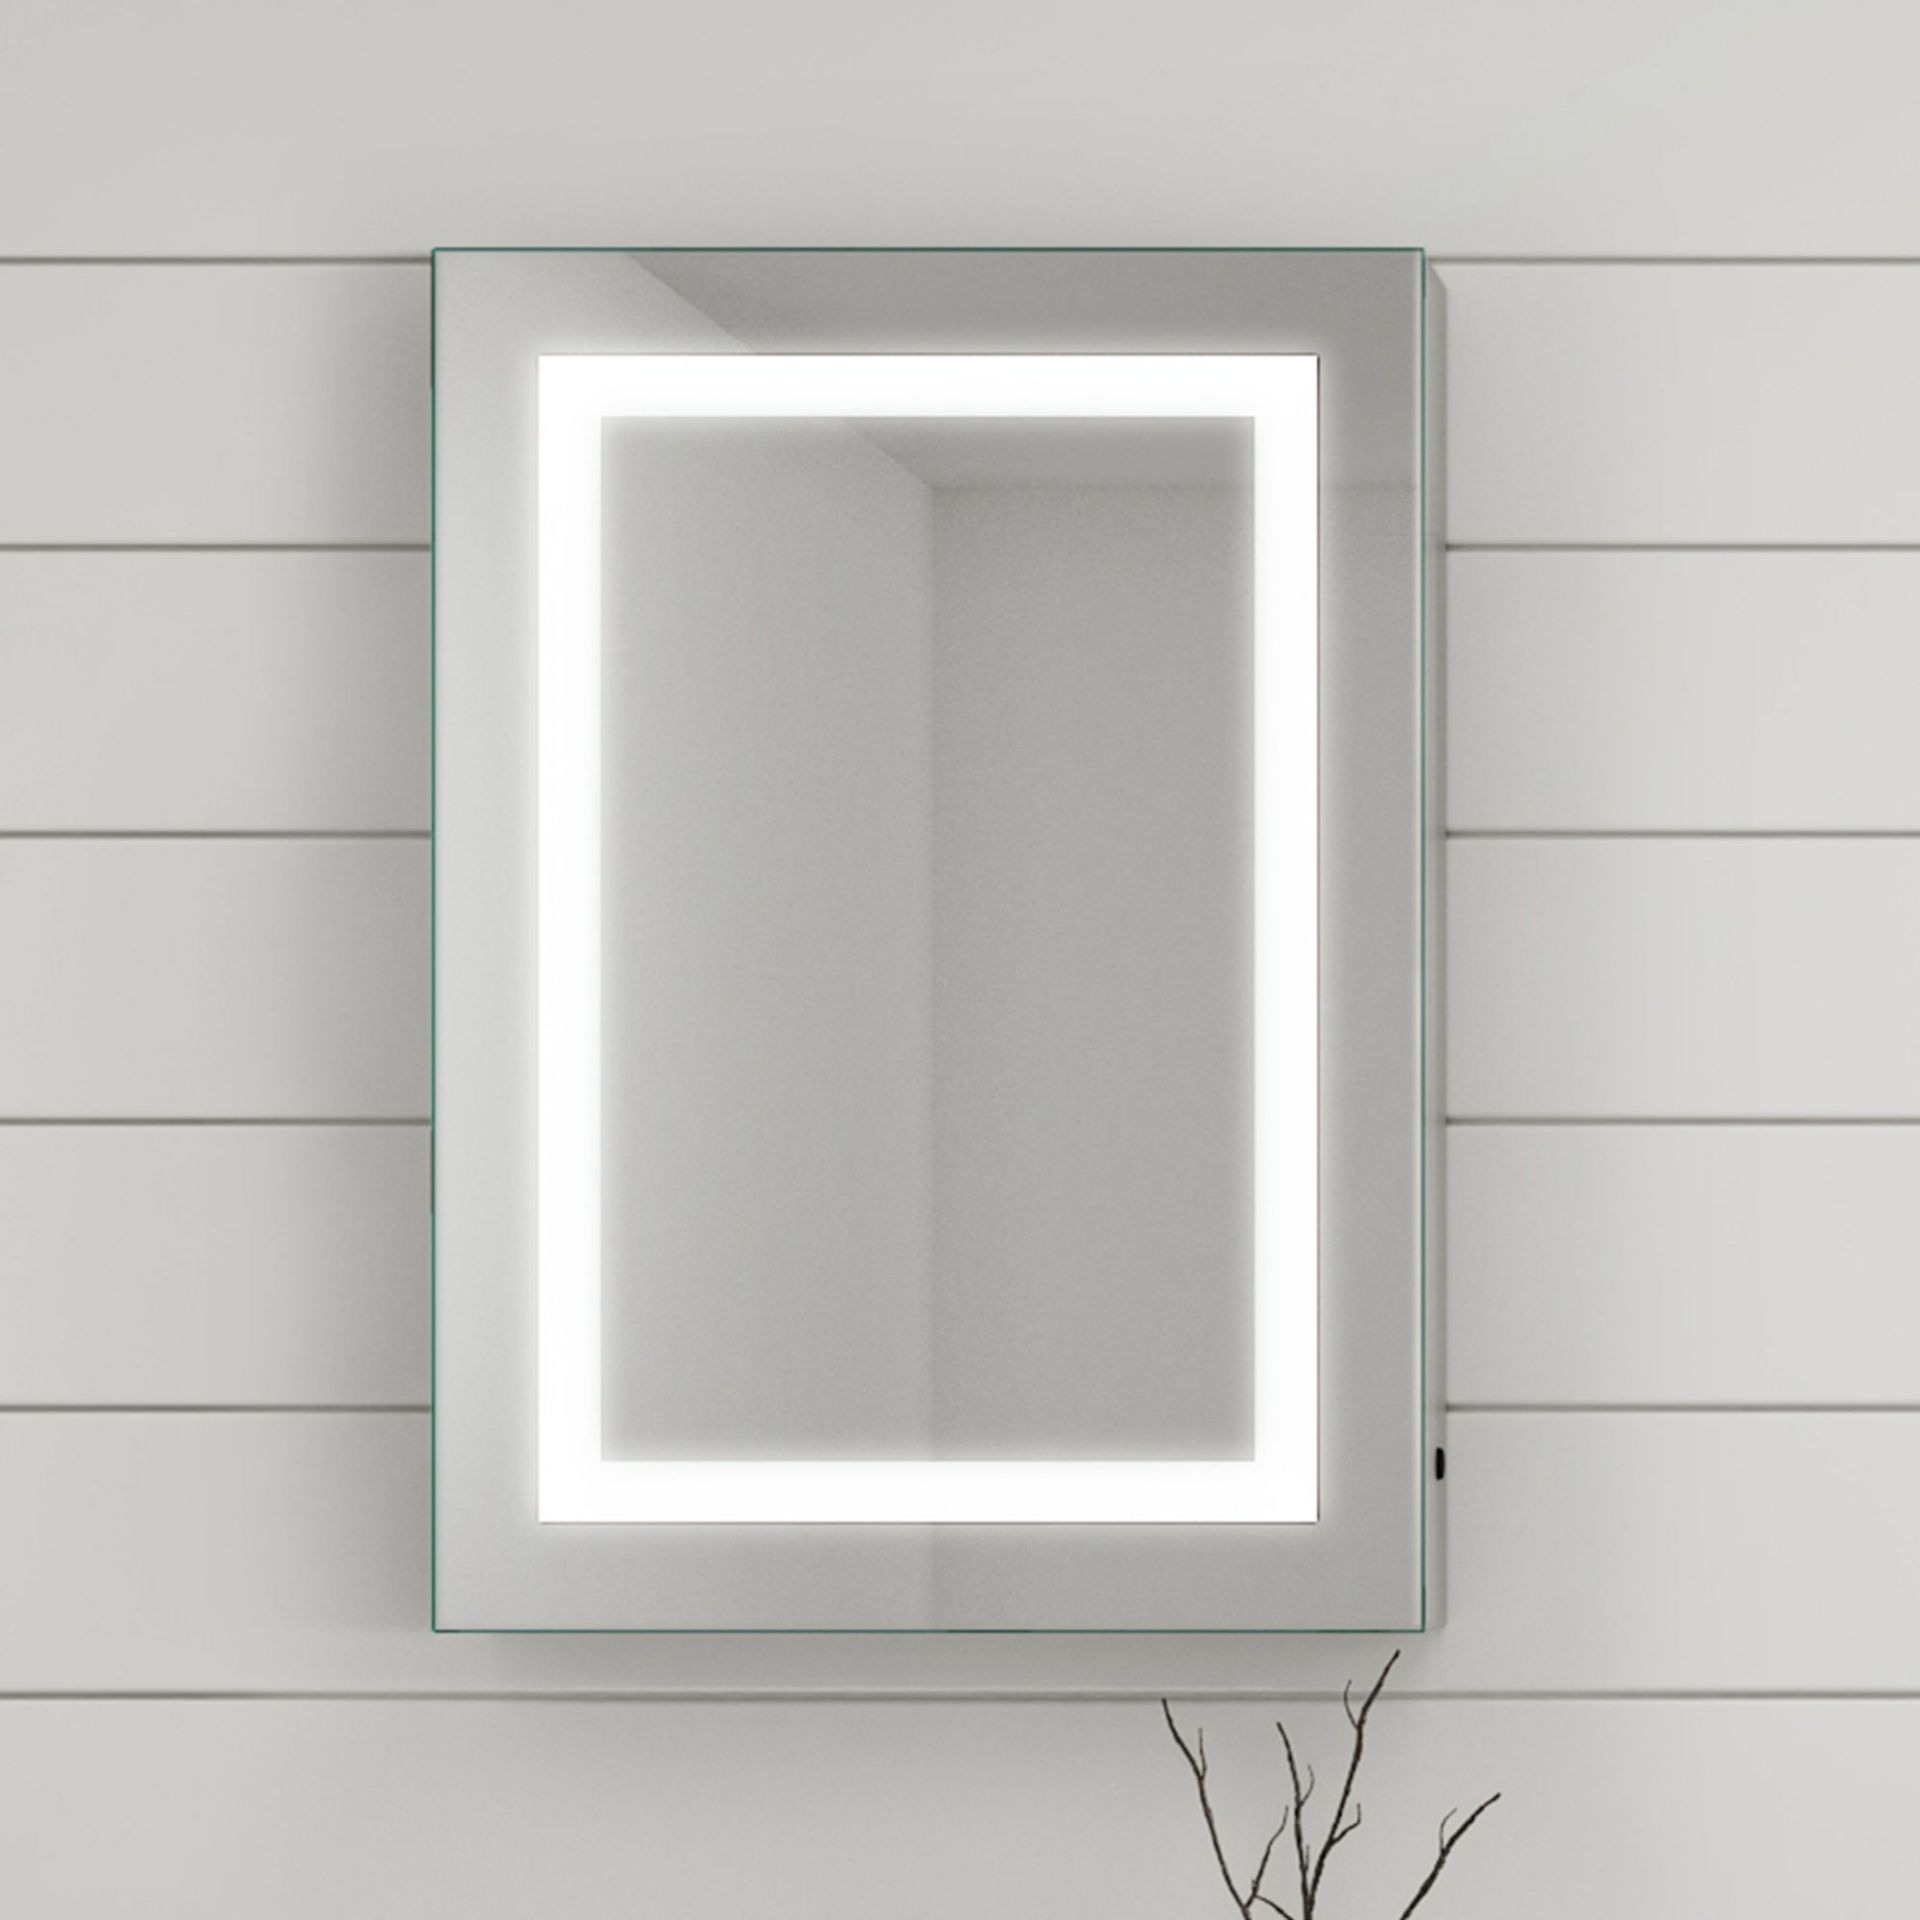 (EY46) 500x700 Nova Illuminated LED Mirror Cabinet. RRP £624.99. We love this mirror cabinet as it - Image 5 of 5